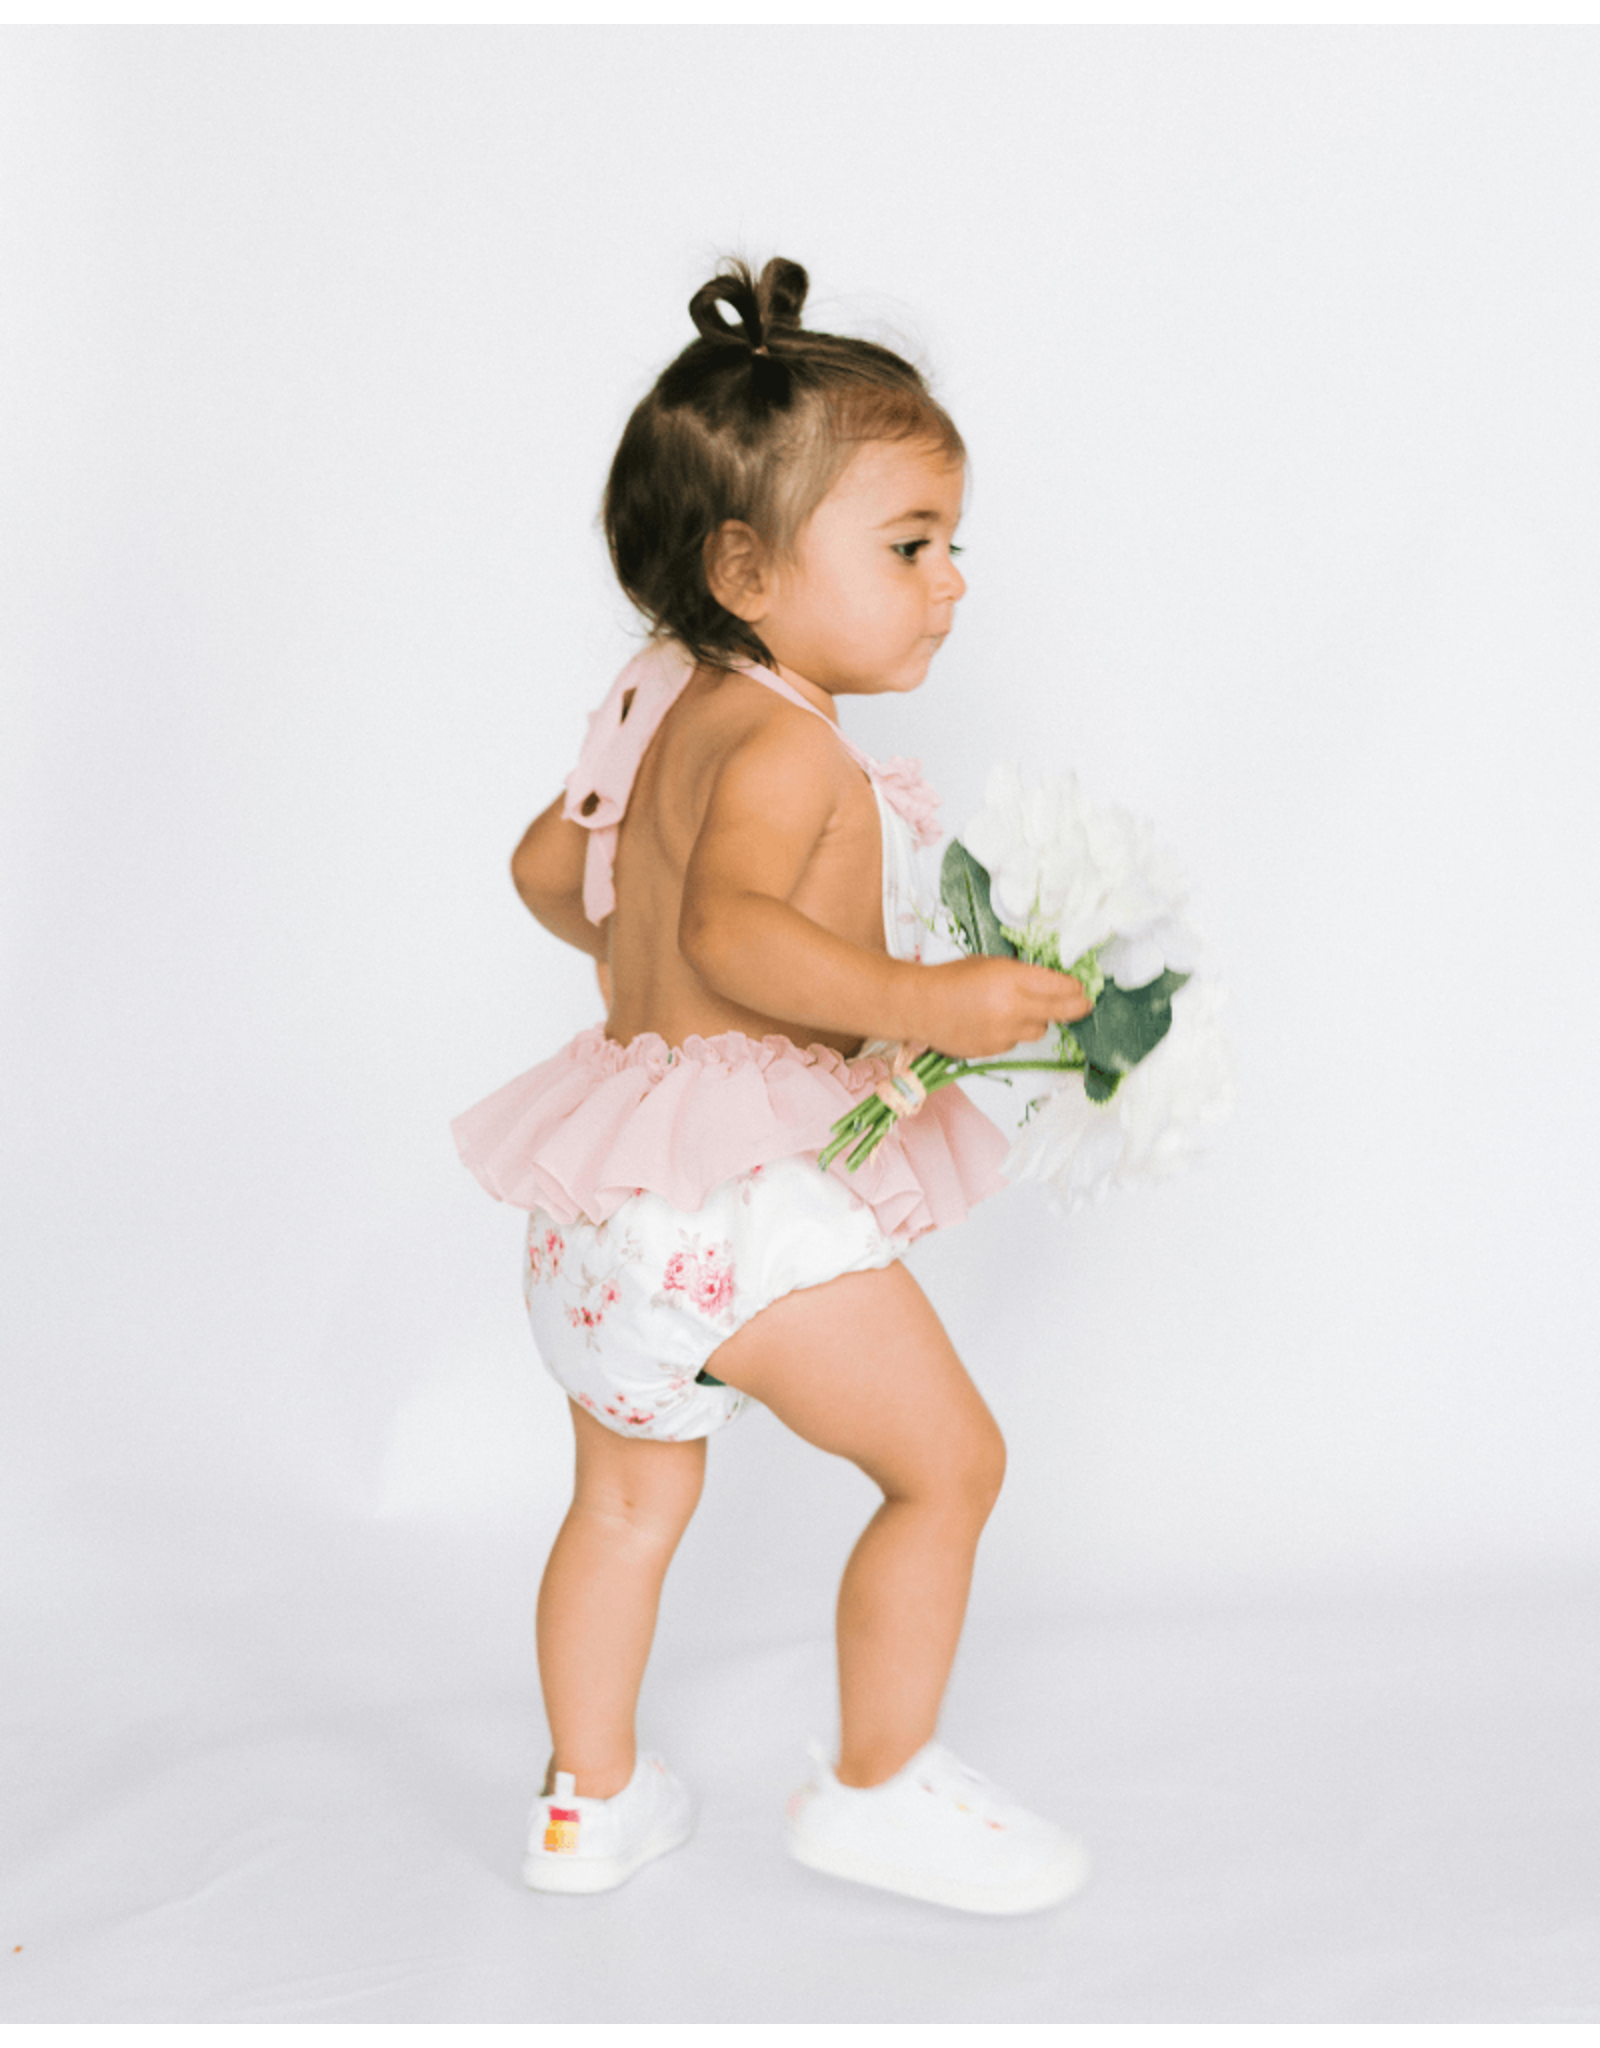 Baileys Blossoms Bailey's Blossom- Seraphina Halter Romper Pink/Tan Floral